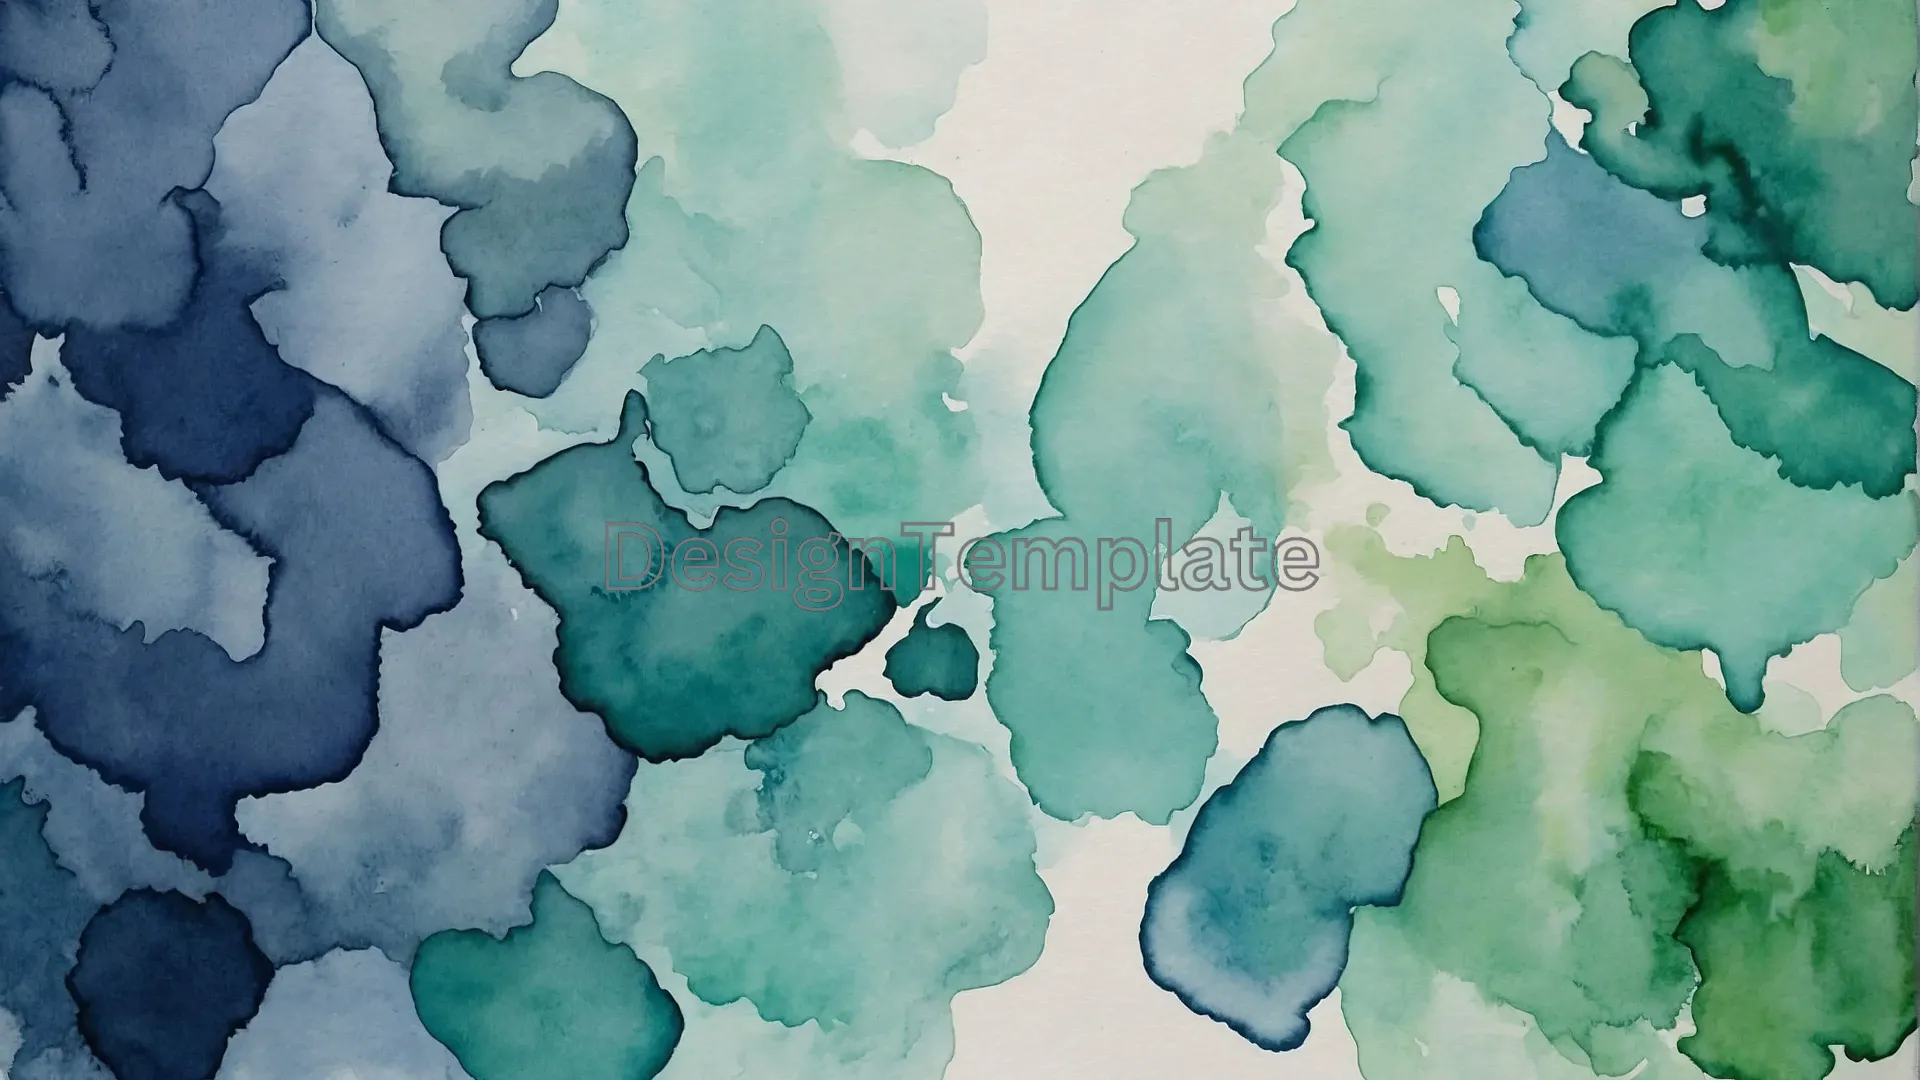 Abstract Watercolor Paint Photo for Design Projects